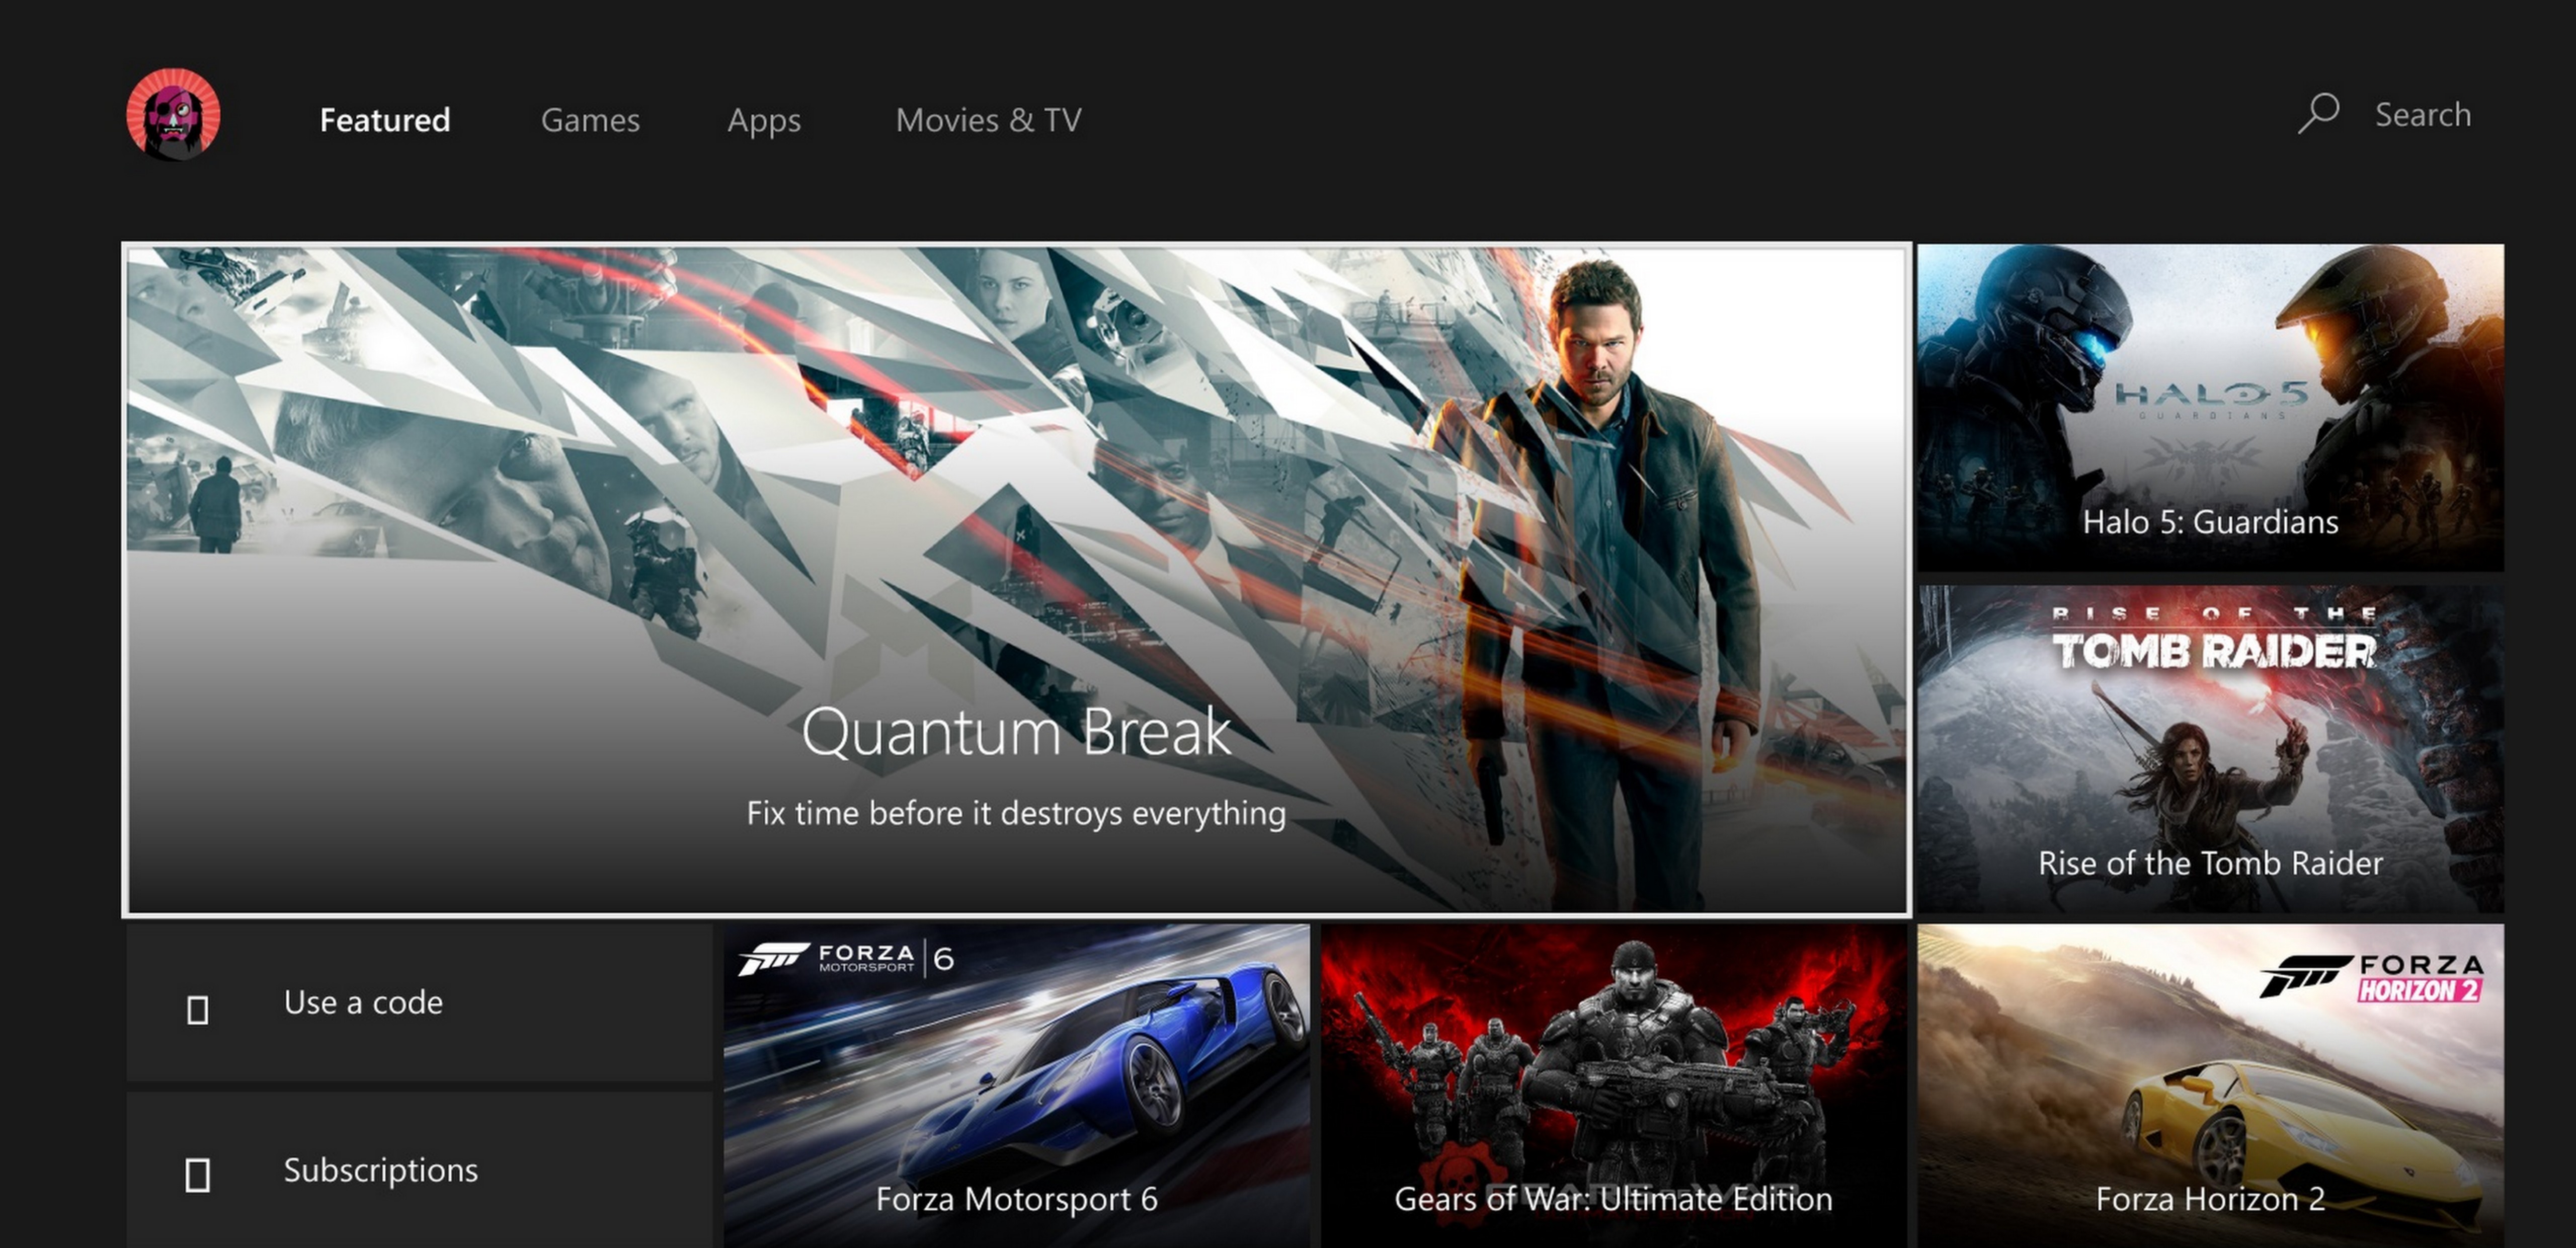 Tub salami Stressvol New Content, Cortana Integration and More Coming in the Xbox Summer Update  | Windows Experience Blog